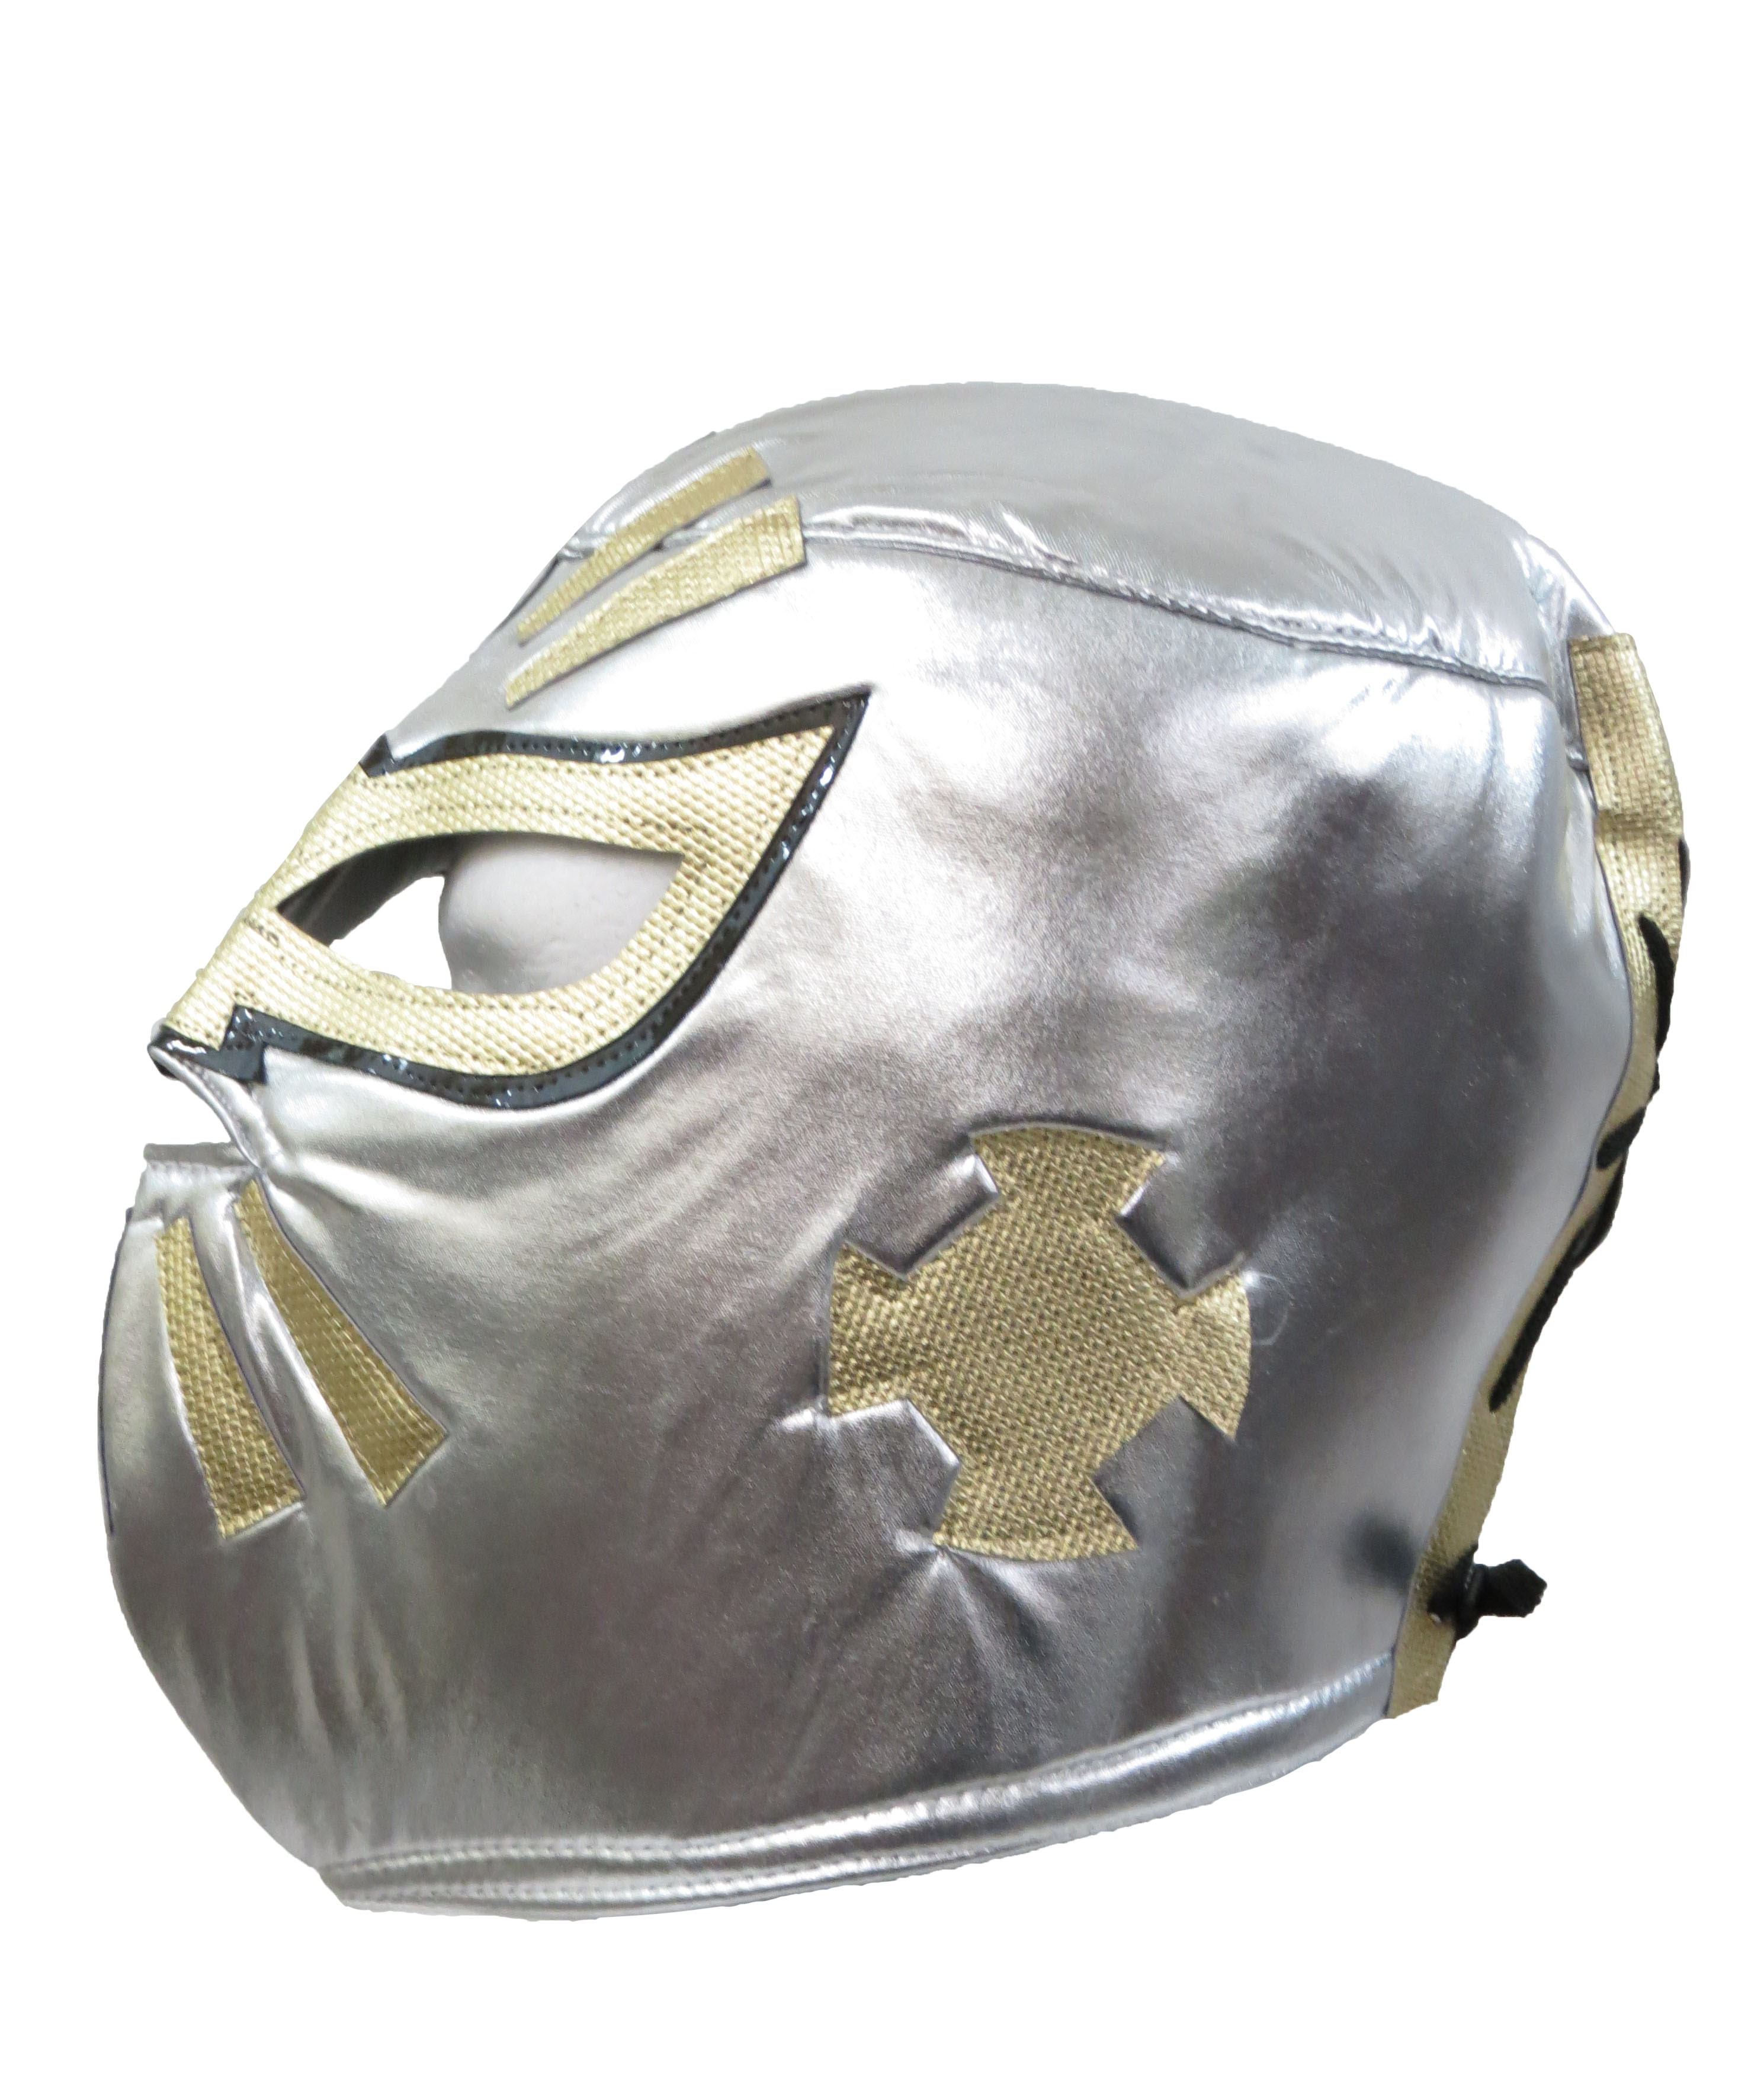 Mistico Sin Cara Adult Lucha Libre Wrestling Mask (Pro-fit) Costume Wear - Silver